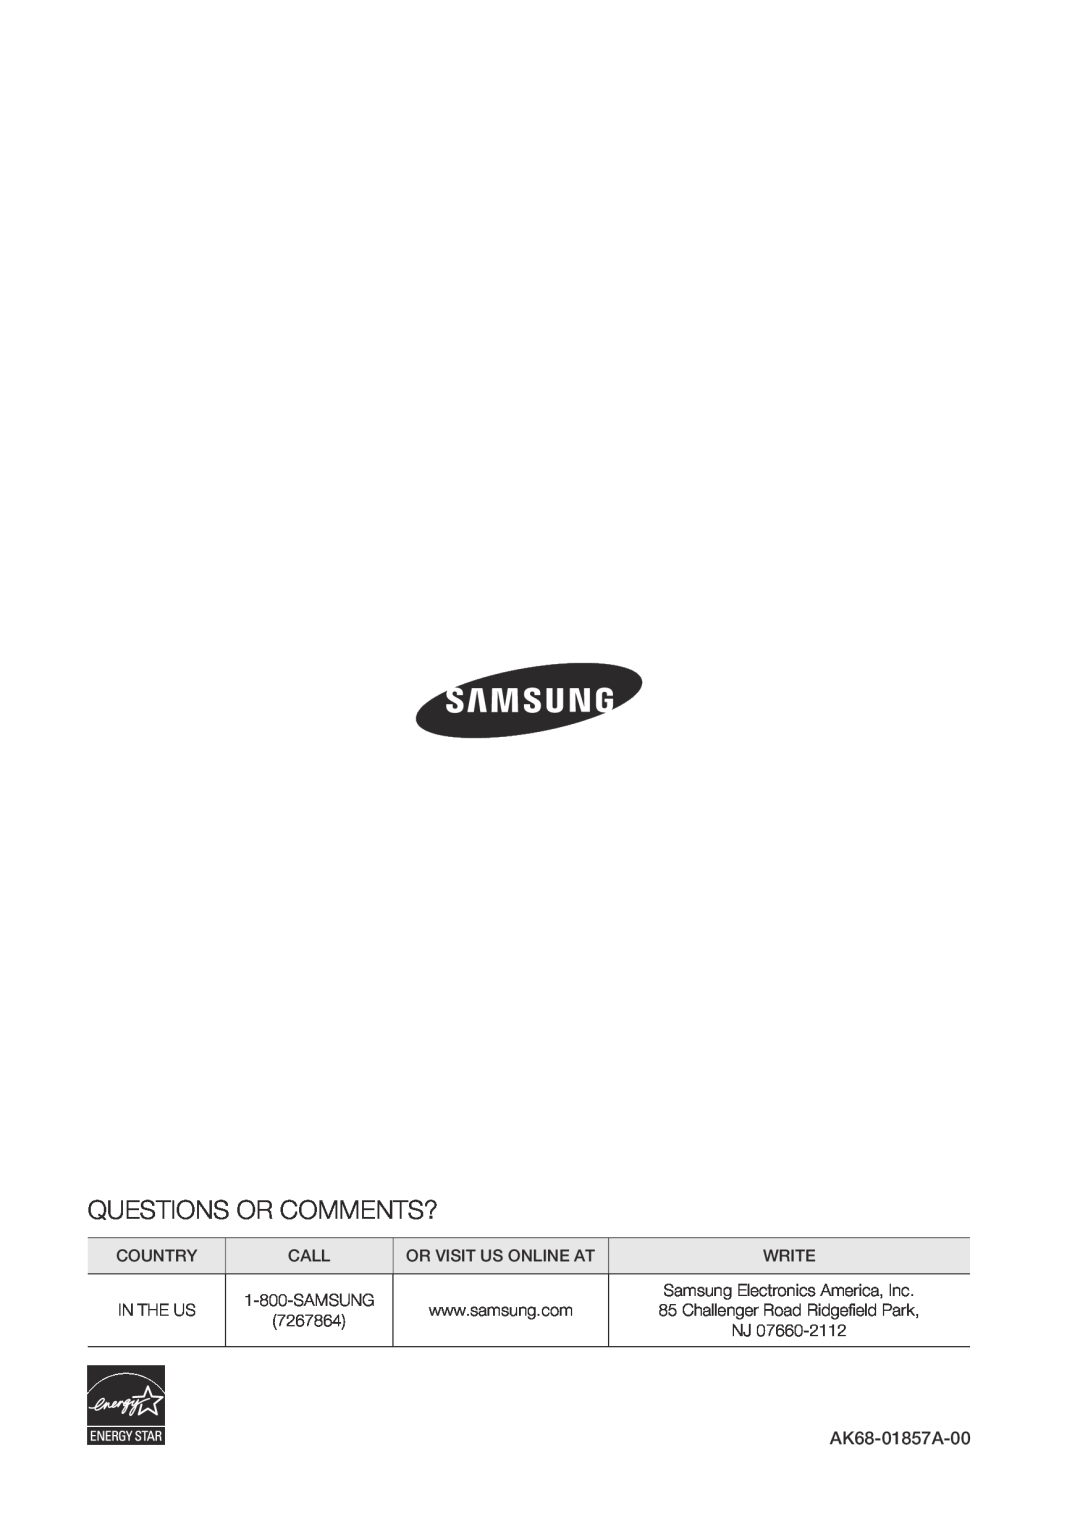 Samsung BD-C7500/XEN, BD-C7500/XEF, BD-C7500/EDC, BD-C7500/XAA Questions Or Comments?, Country, In The Us, AK68-01857A-00 